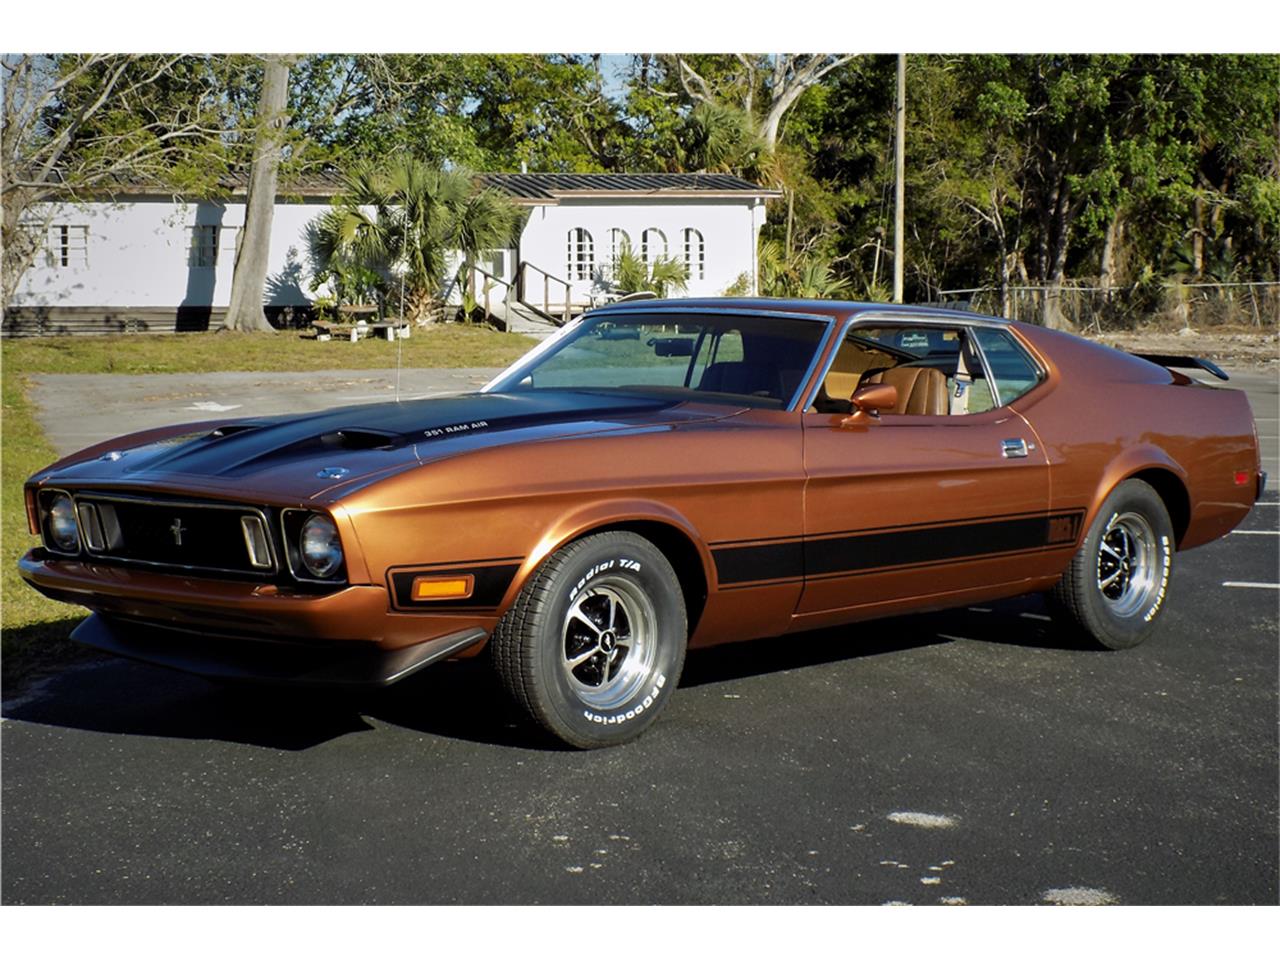 1973 Mach One Mustang